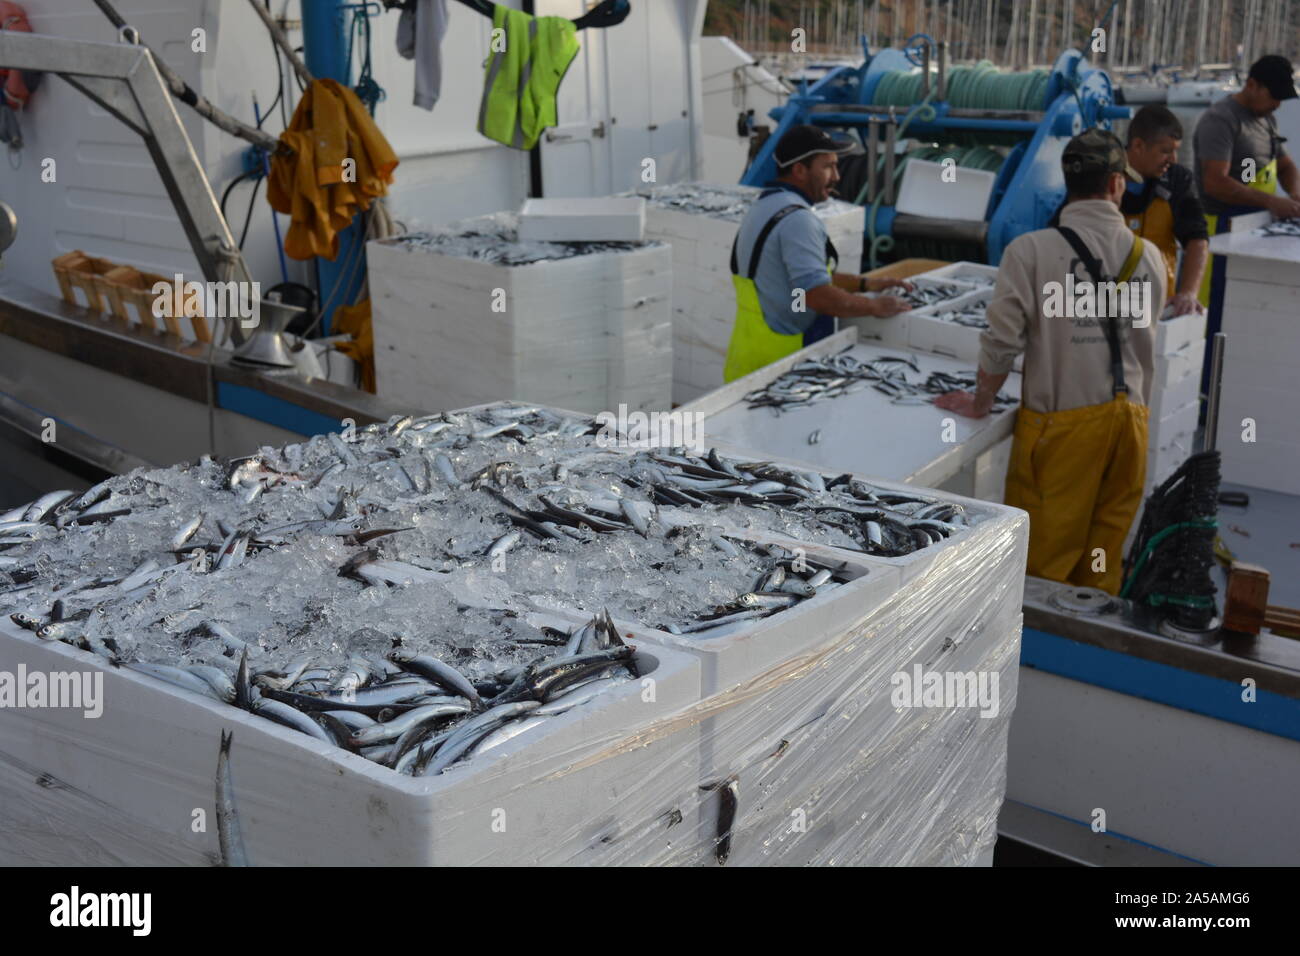 Unloading Freshly Caught Fish With A Transport Basket Stock Photo